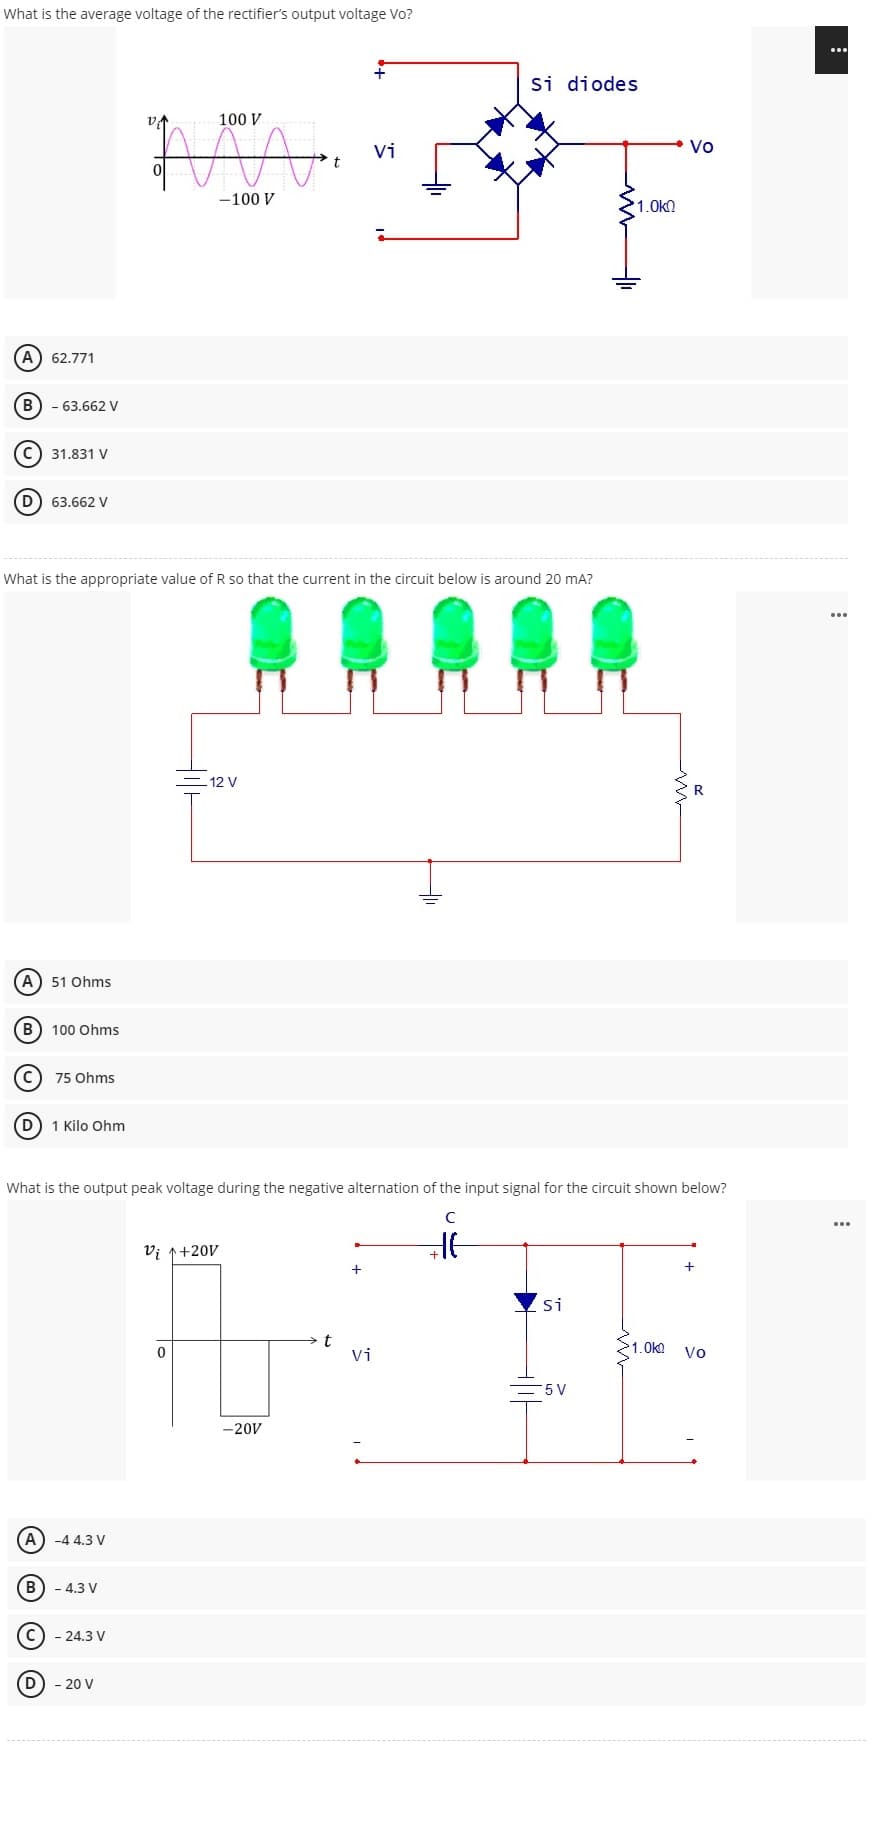 What is the average voltage of the rectifier's output voltage Vo?
100 V
"MA
Vi
-100 V
(A) 62.771
B) - 63.662 V
C) 31.831 V
D 63.662 V
What is the appropriate value of R so that the current in the circuit below is around 20 mA?
- 12 V
(A) -4 4.3 V
B) - 4.3 V
- 24.3 V
(D) - 20 V
Si diodes
-20V
R
A) 51 Ohms
B
100 Ohms
C
75 Ohms
D) 1 Kilo Ohm
What is the output peak voltage during the negative alternation of the input signal for the circuit shown below?
с
Vi ↑+20V
HE
+
Si
>1.0kg
0
Vi
Vo
5 V
t
imm
1.0kQ
Vo
...
...